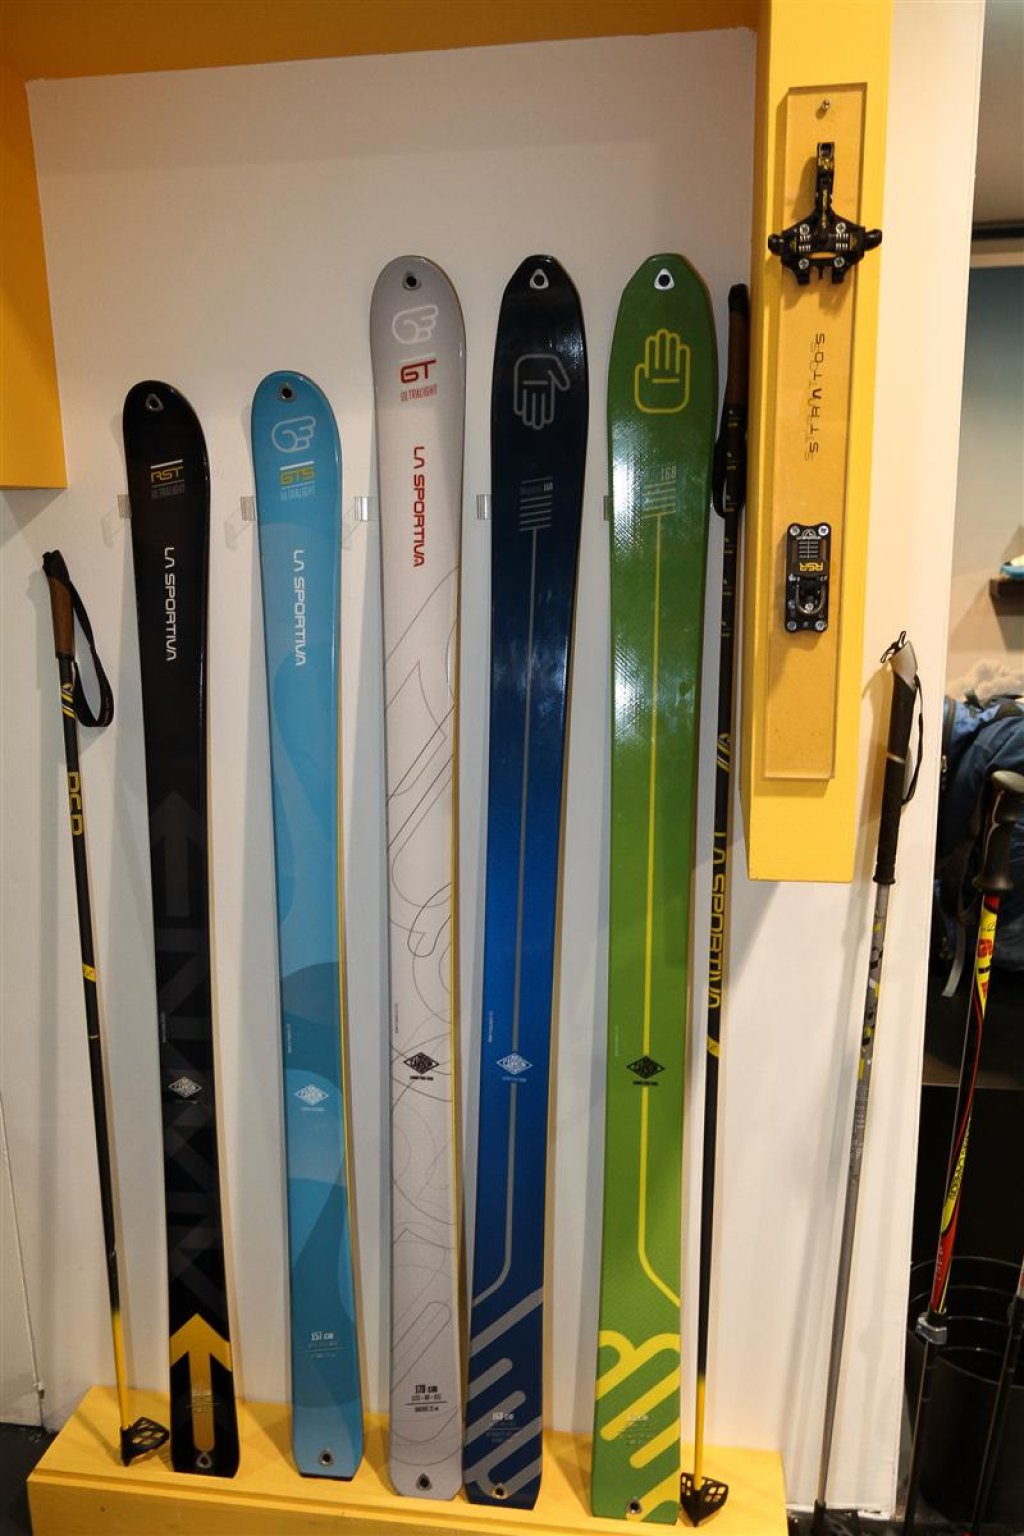 The ski line from LaSportiva: RST, GTS, GT, Lo5 & Hi5 - all in consistent lightweight carbon construction